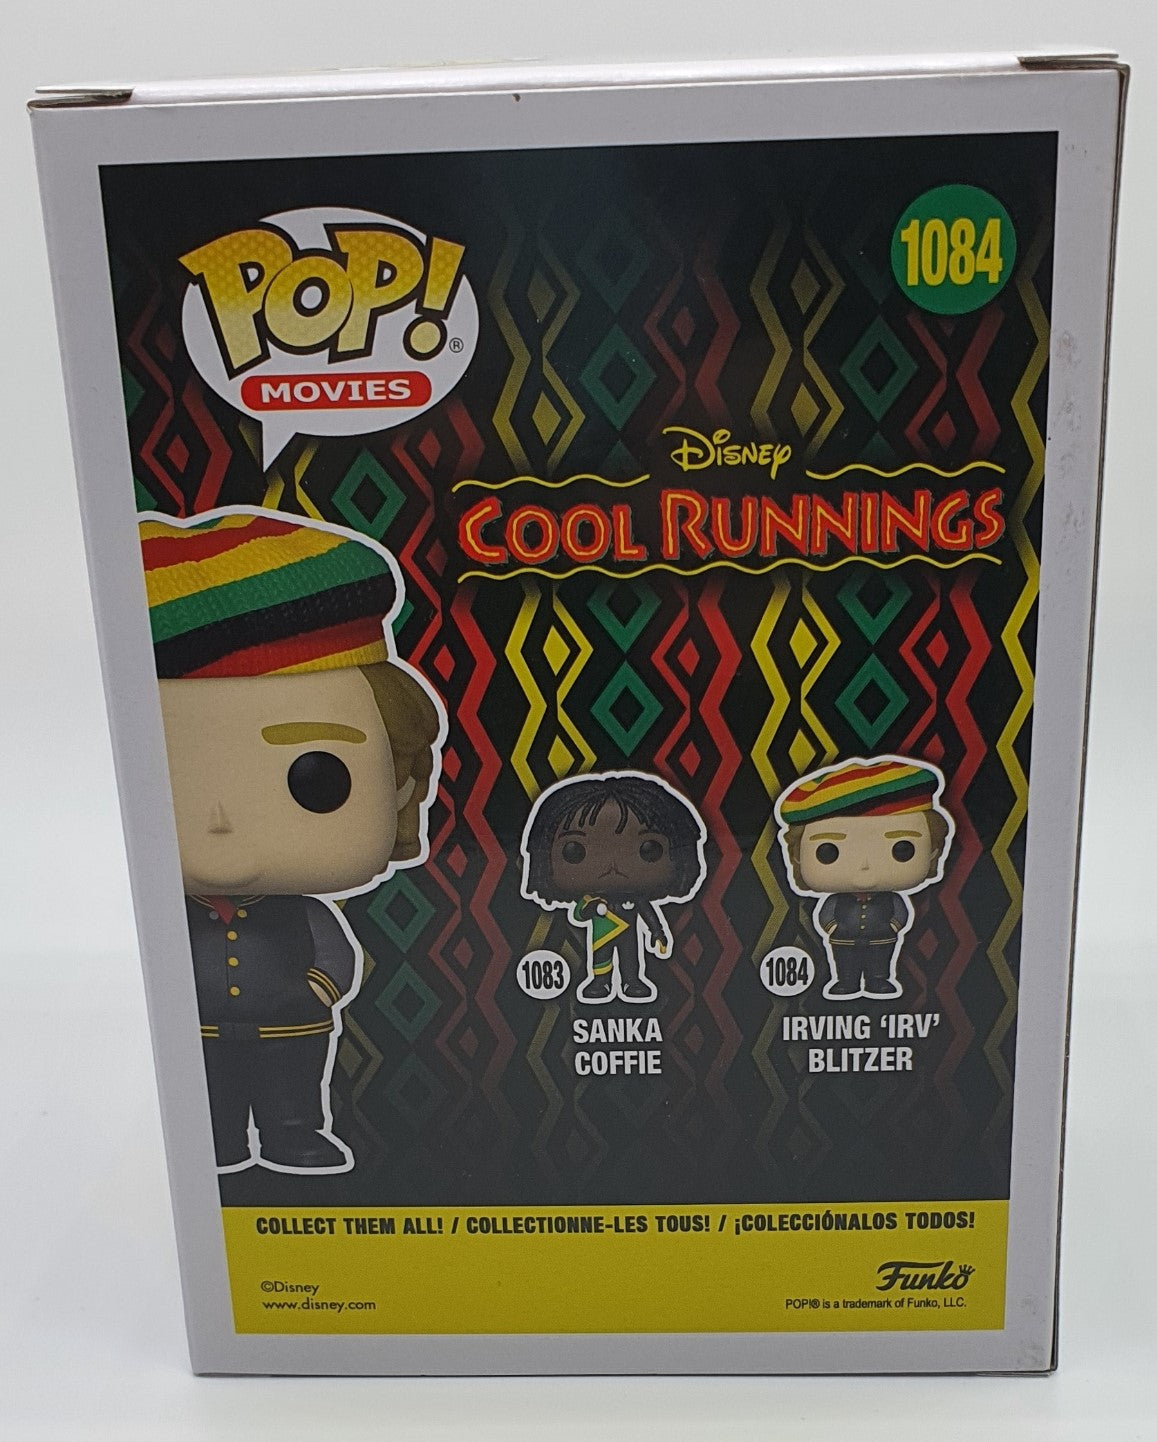 1084 - MOVIES - COOL RUNNINGS - IRVING BLITZER